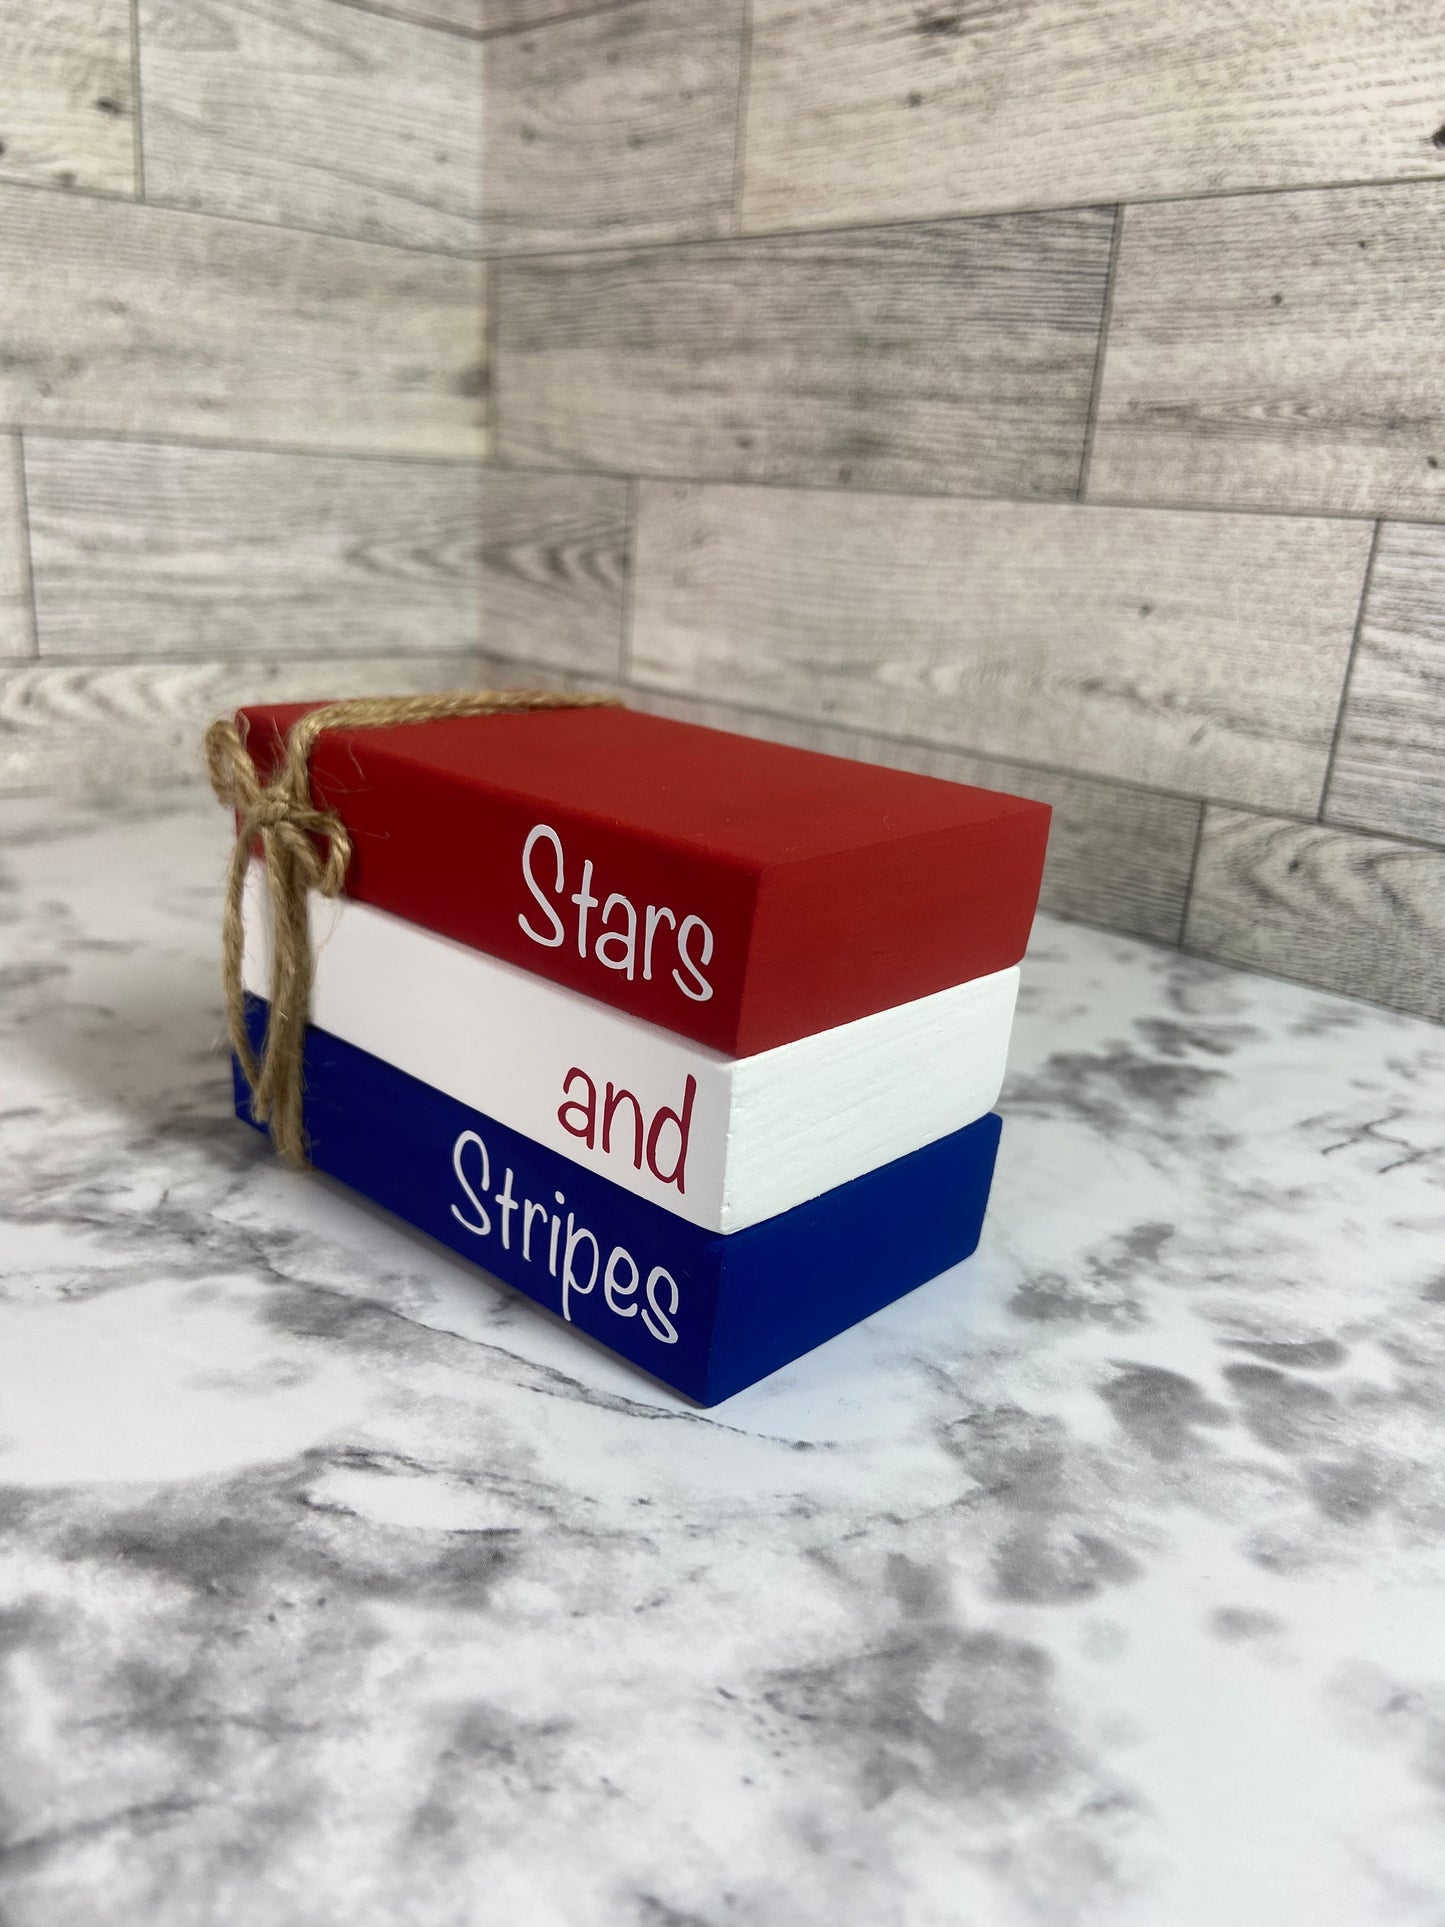 Stars and Stripes - Small Tiered Tray Book Stack